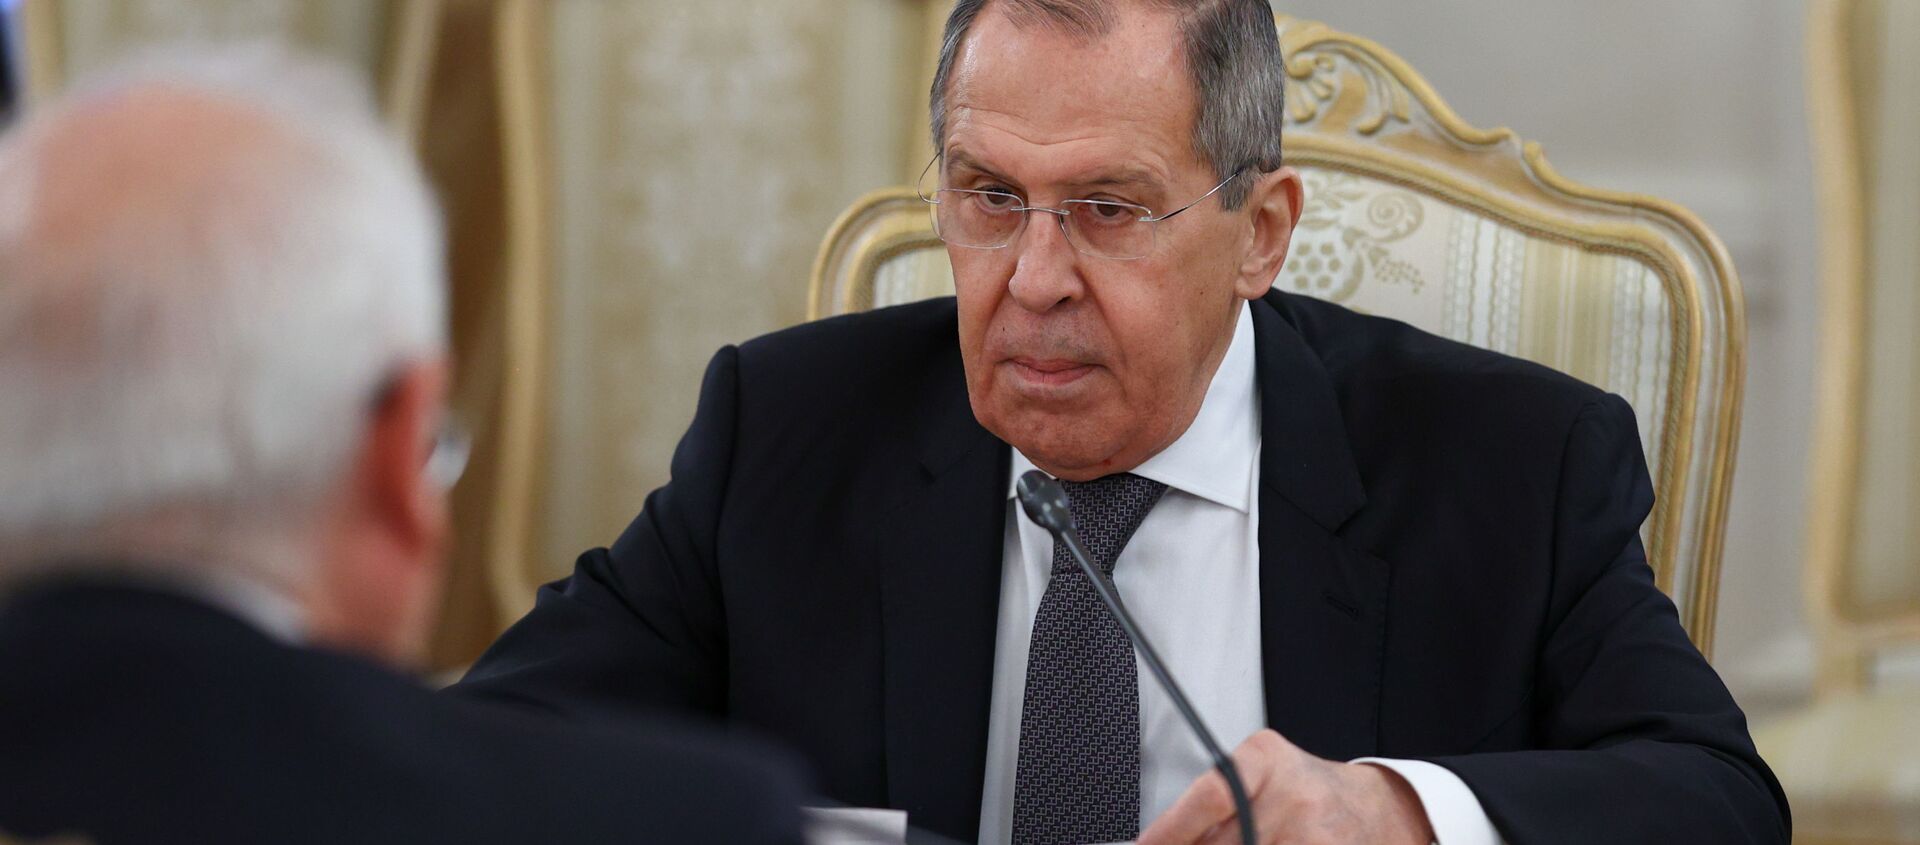 Russia's Foreign Minister Sergei Lavrov attends a meeting with European Union's foreign policy chief Josep Borrell in Moscow, Russia February 5, 2021. - Sputnik International, 1920